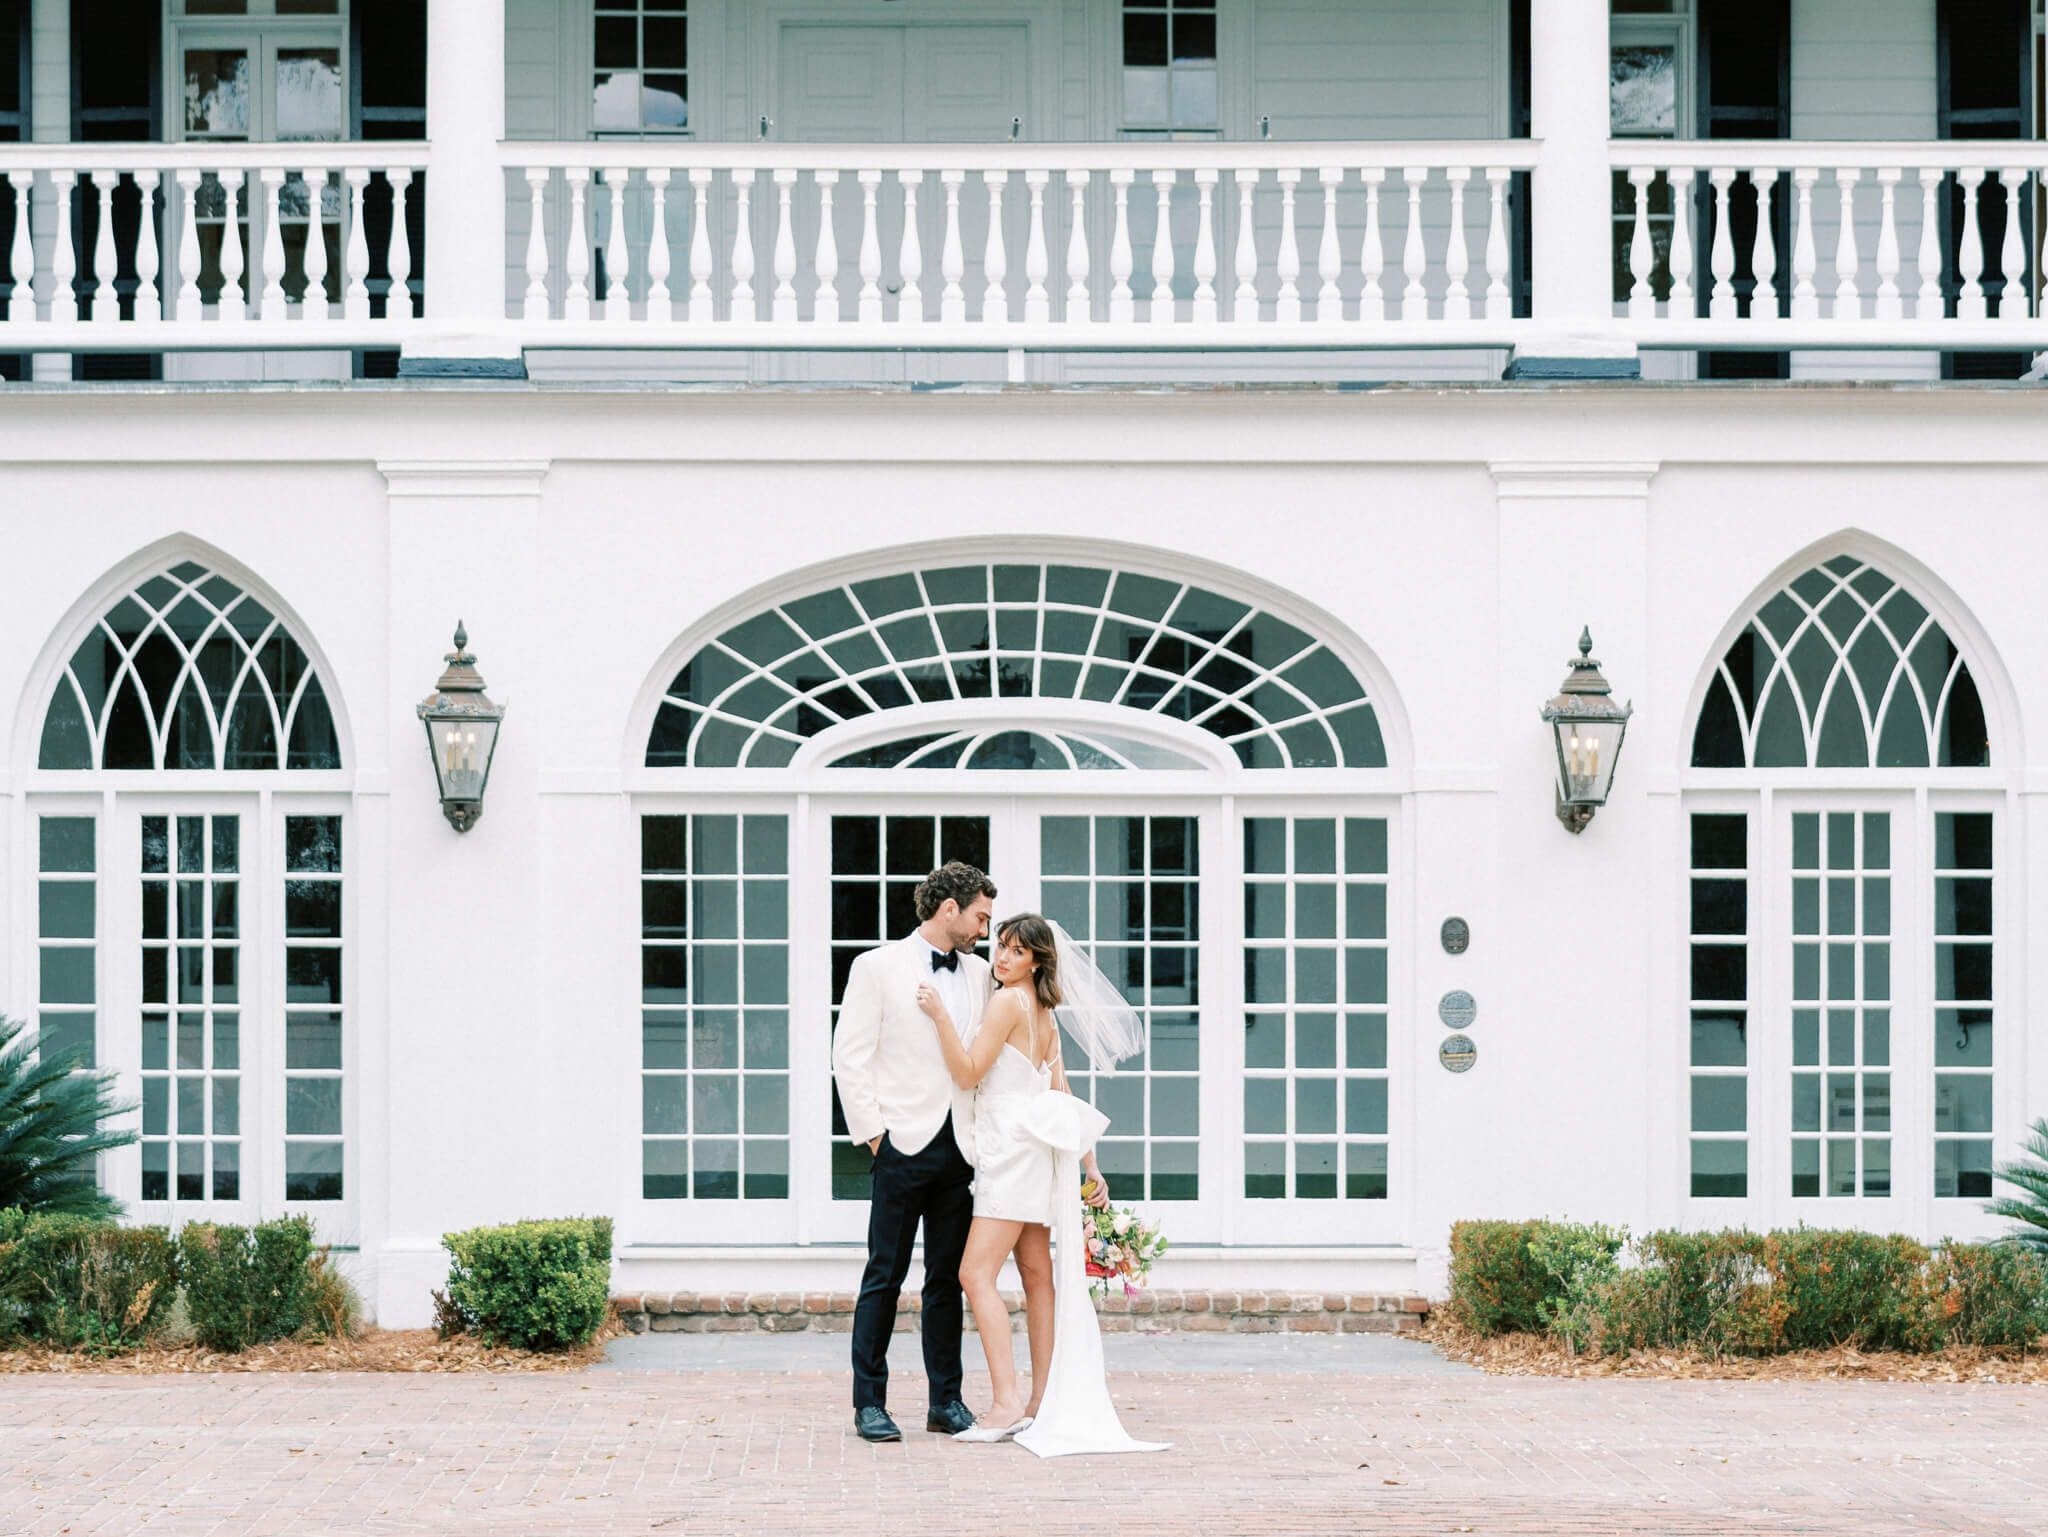 A bride and groom embracing in front of Lowndes Grove's arched windows and porch.